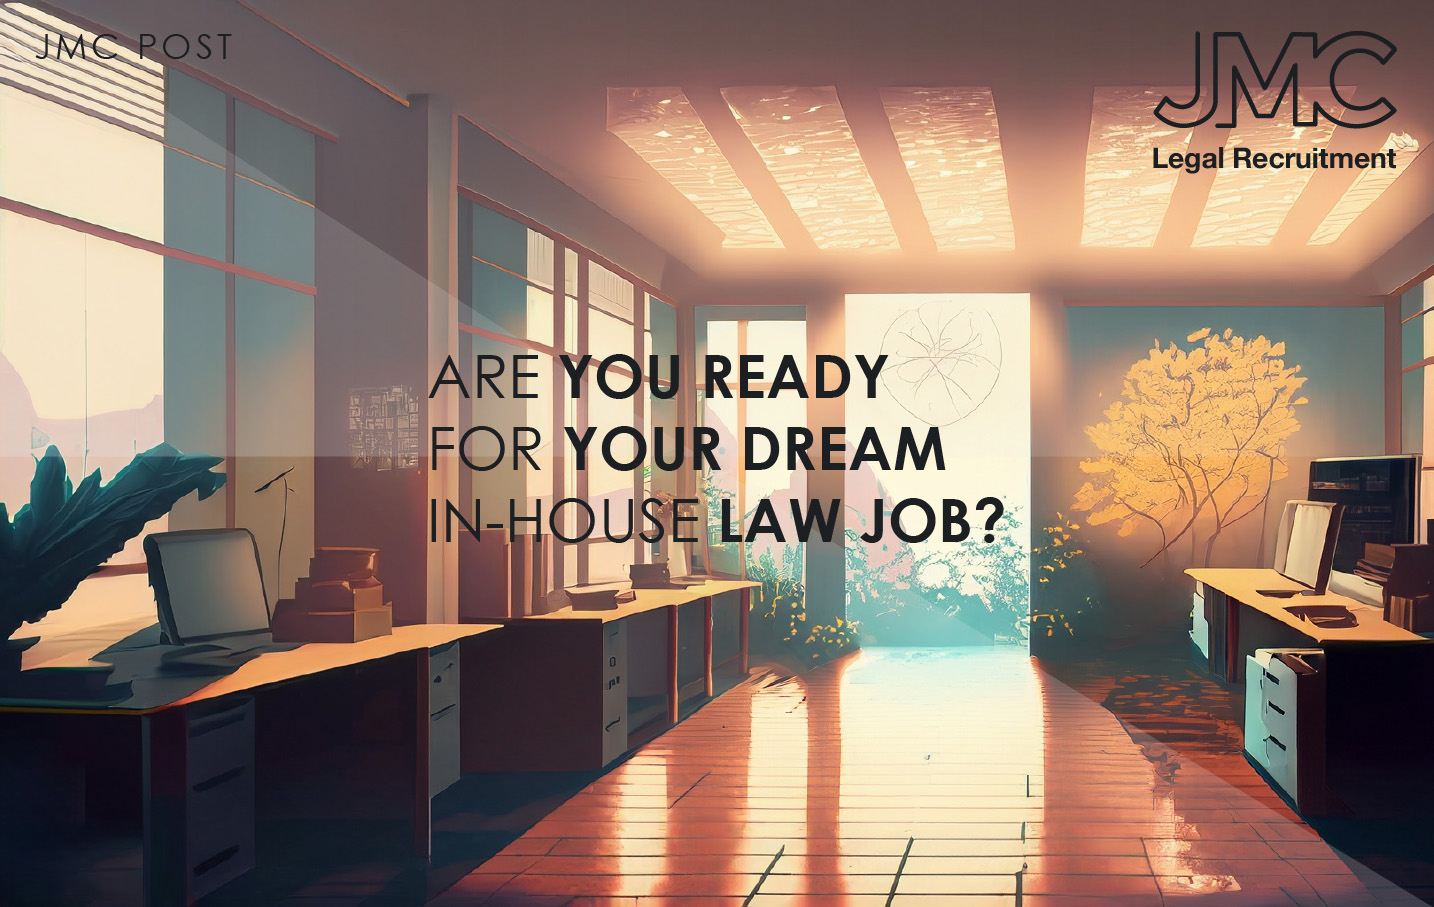 Are You Ready For Your Dream In-House Law Job?